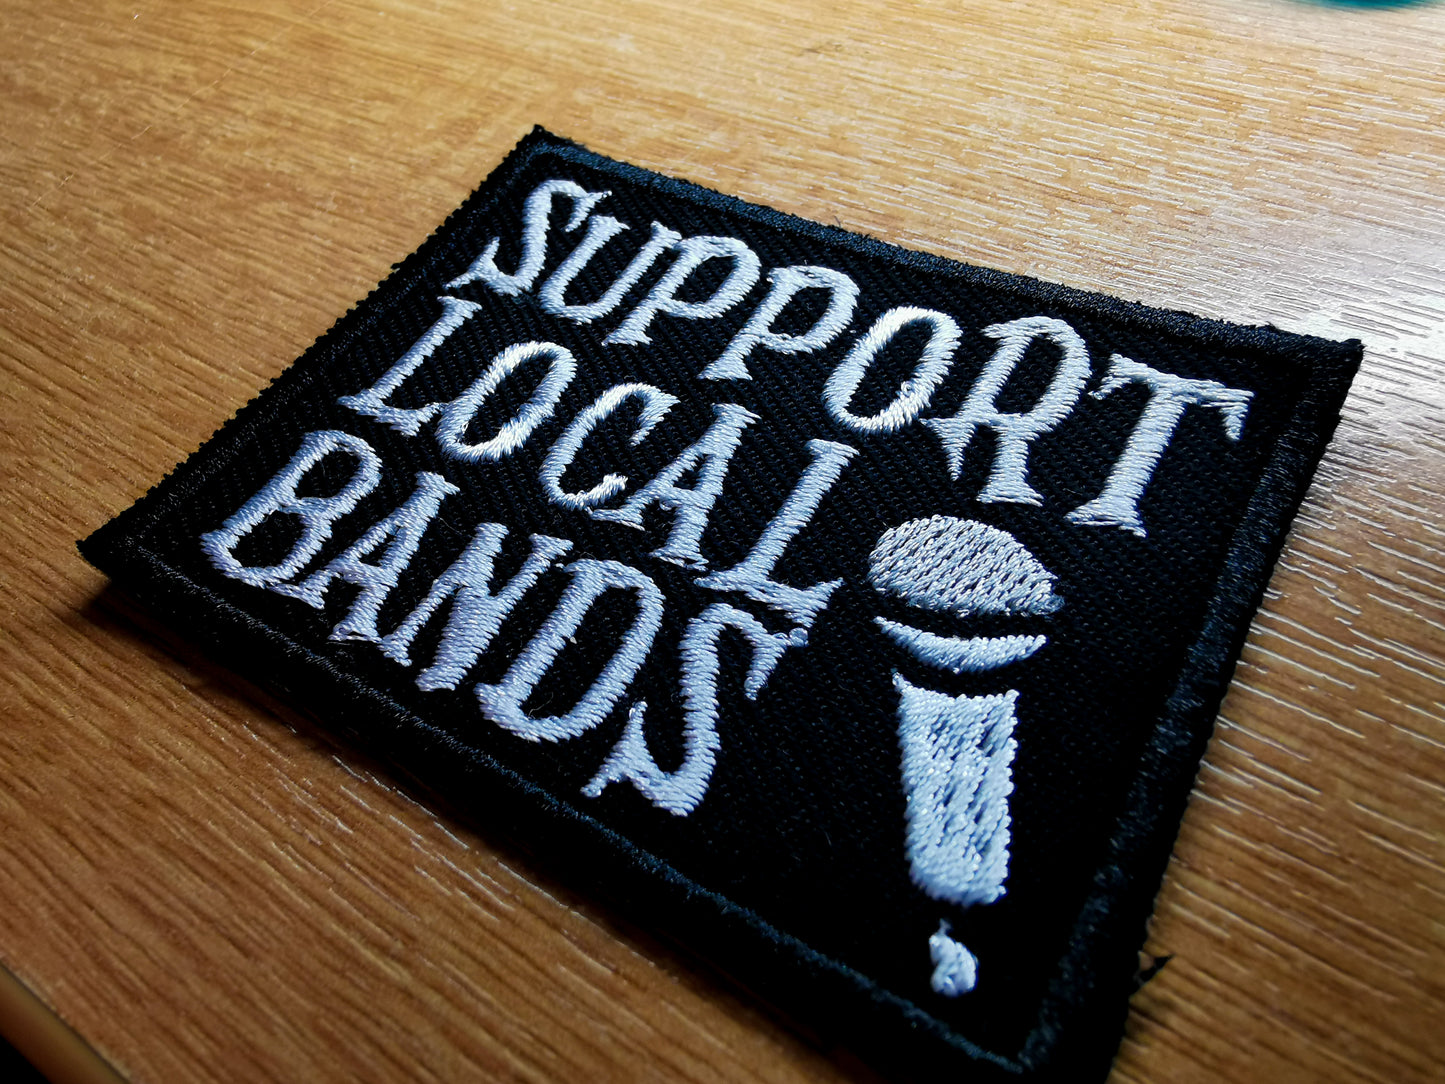 Support Local Bands Embroidered Patch